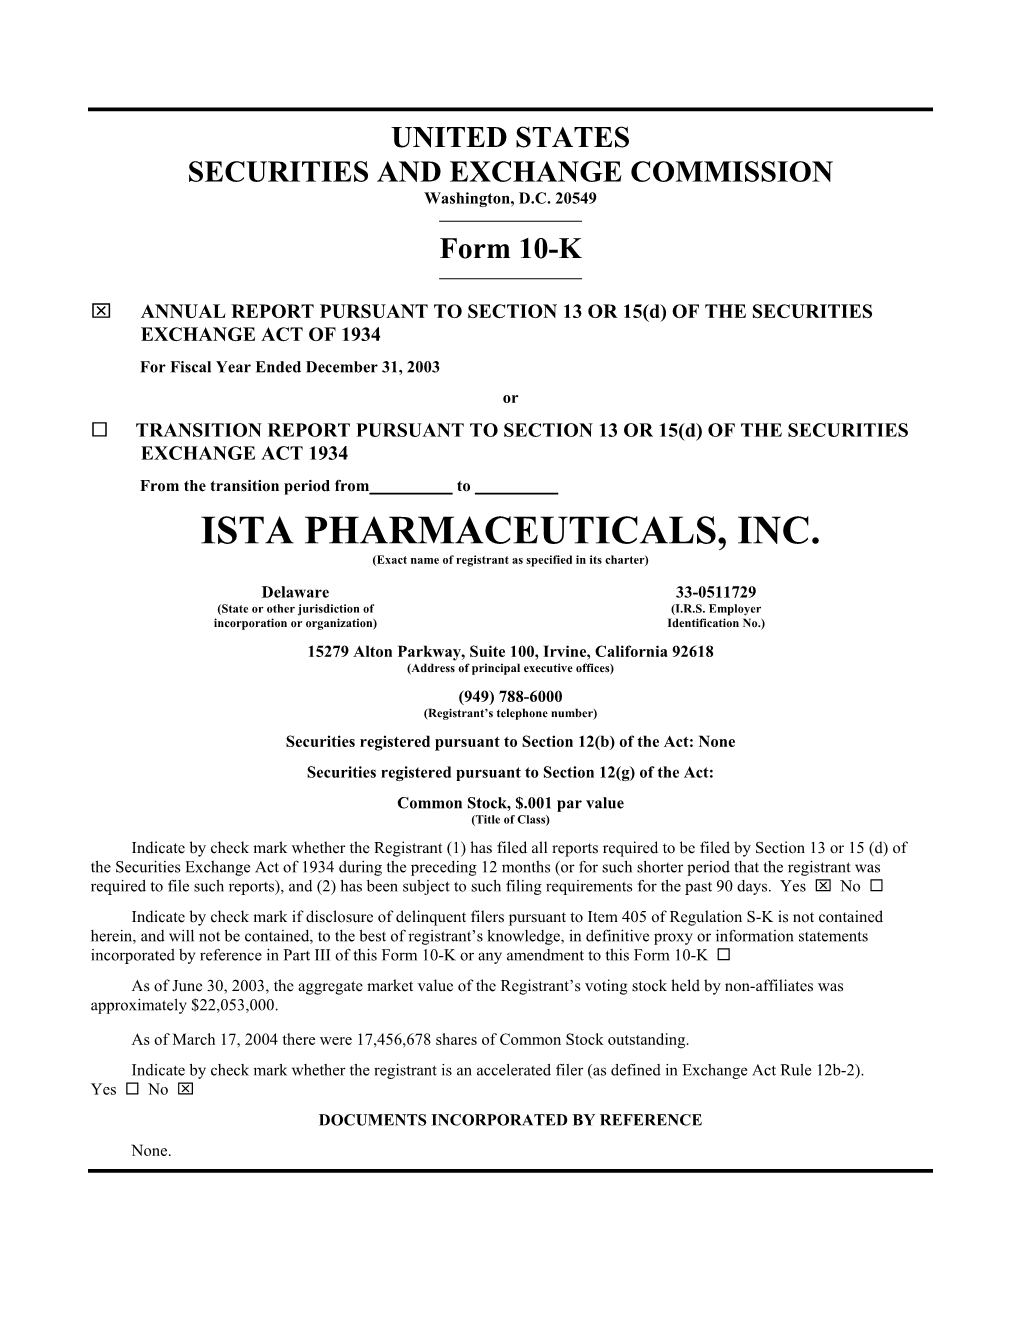 ISTA PHARMACEUTICALS, INC. (Exact Name of Registrant As Specified in Its Charter)